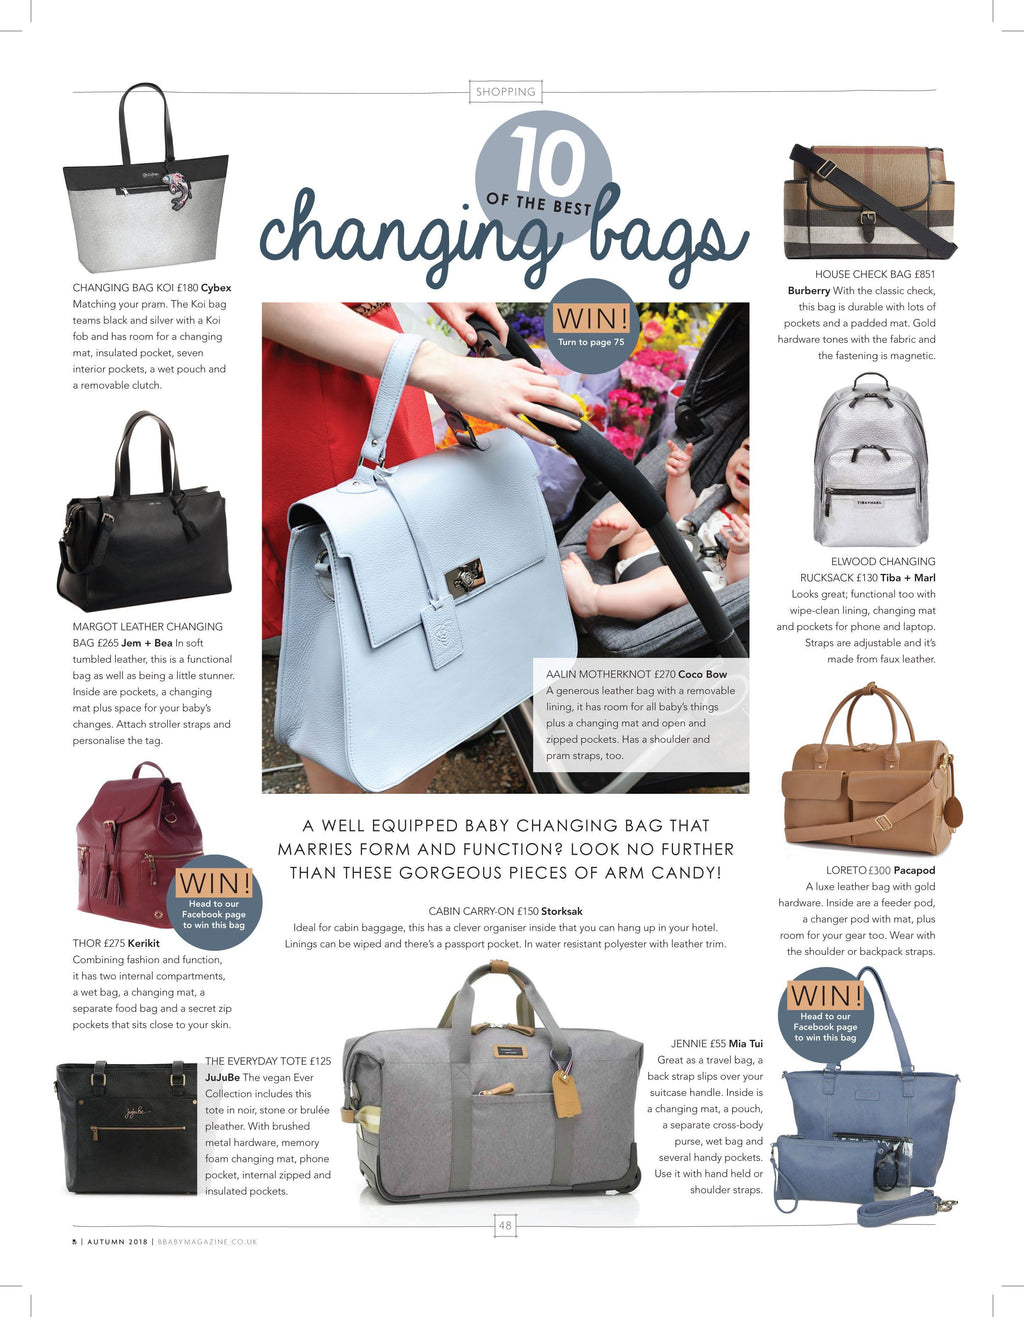 Loreto in B Baby Magazine's Top 10 changing bags